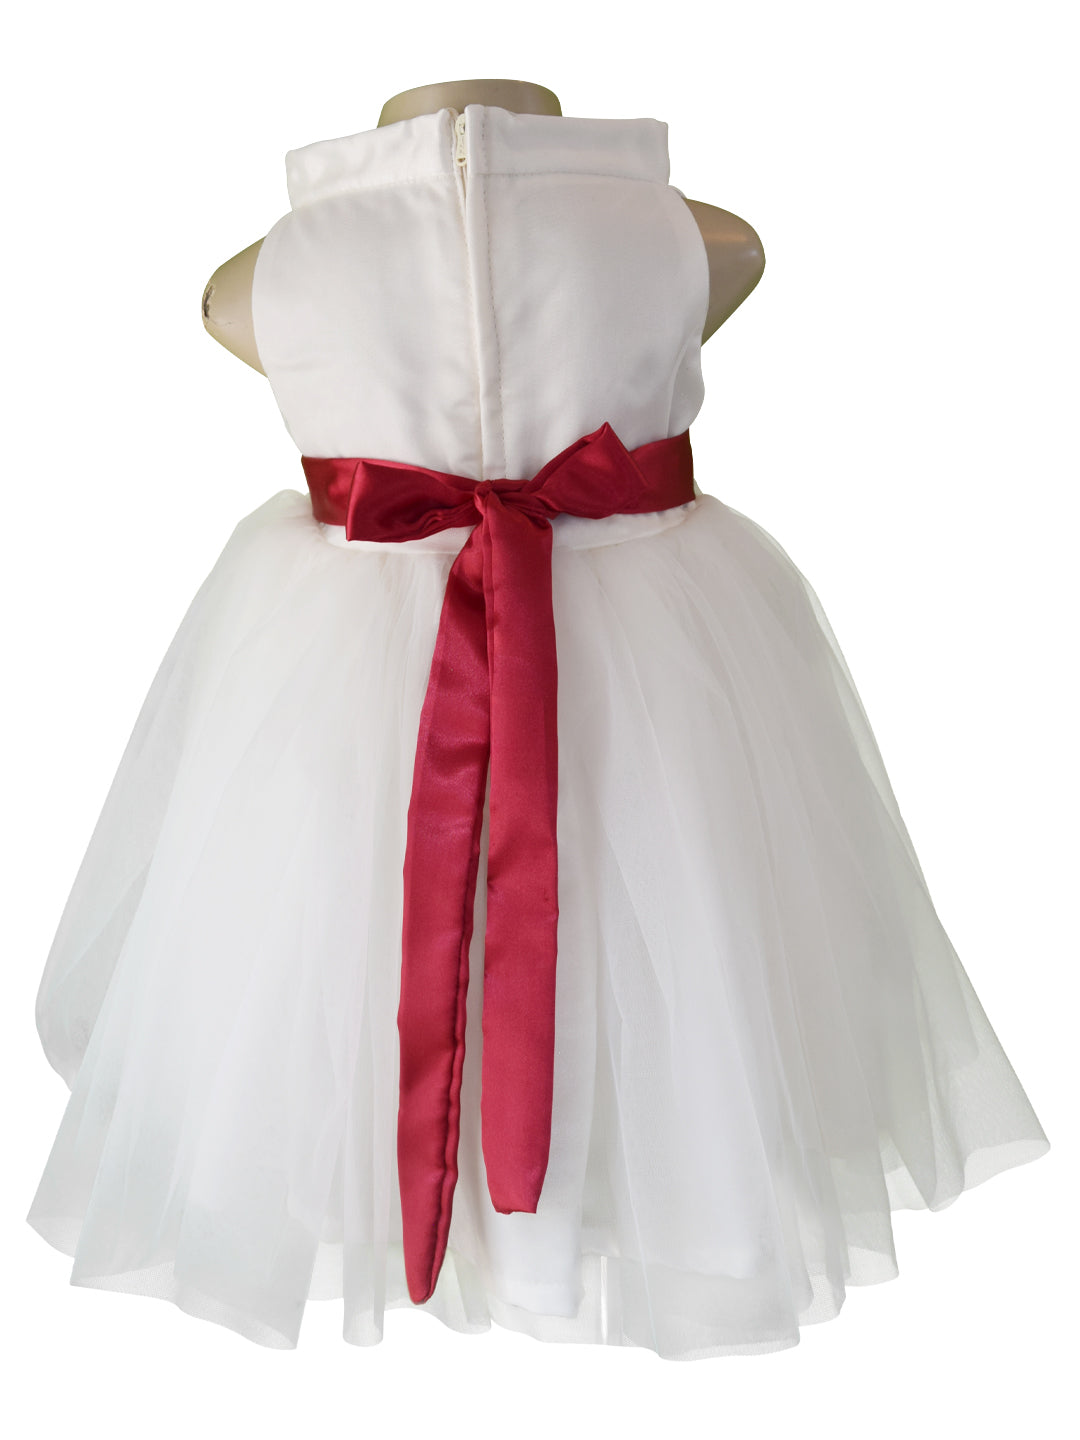 Dress for kids_Faye Offwhite Embroidered Dress